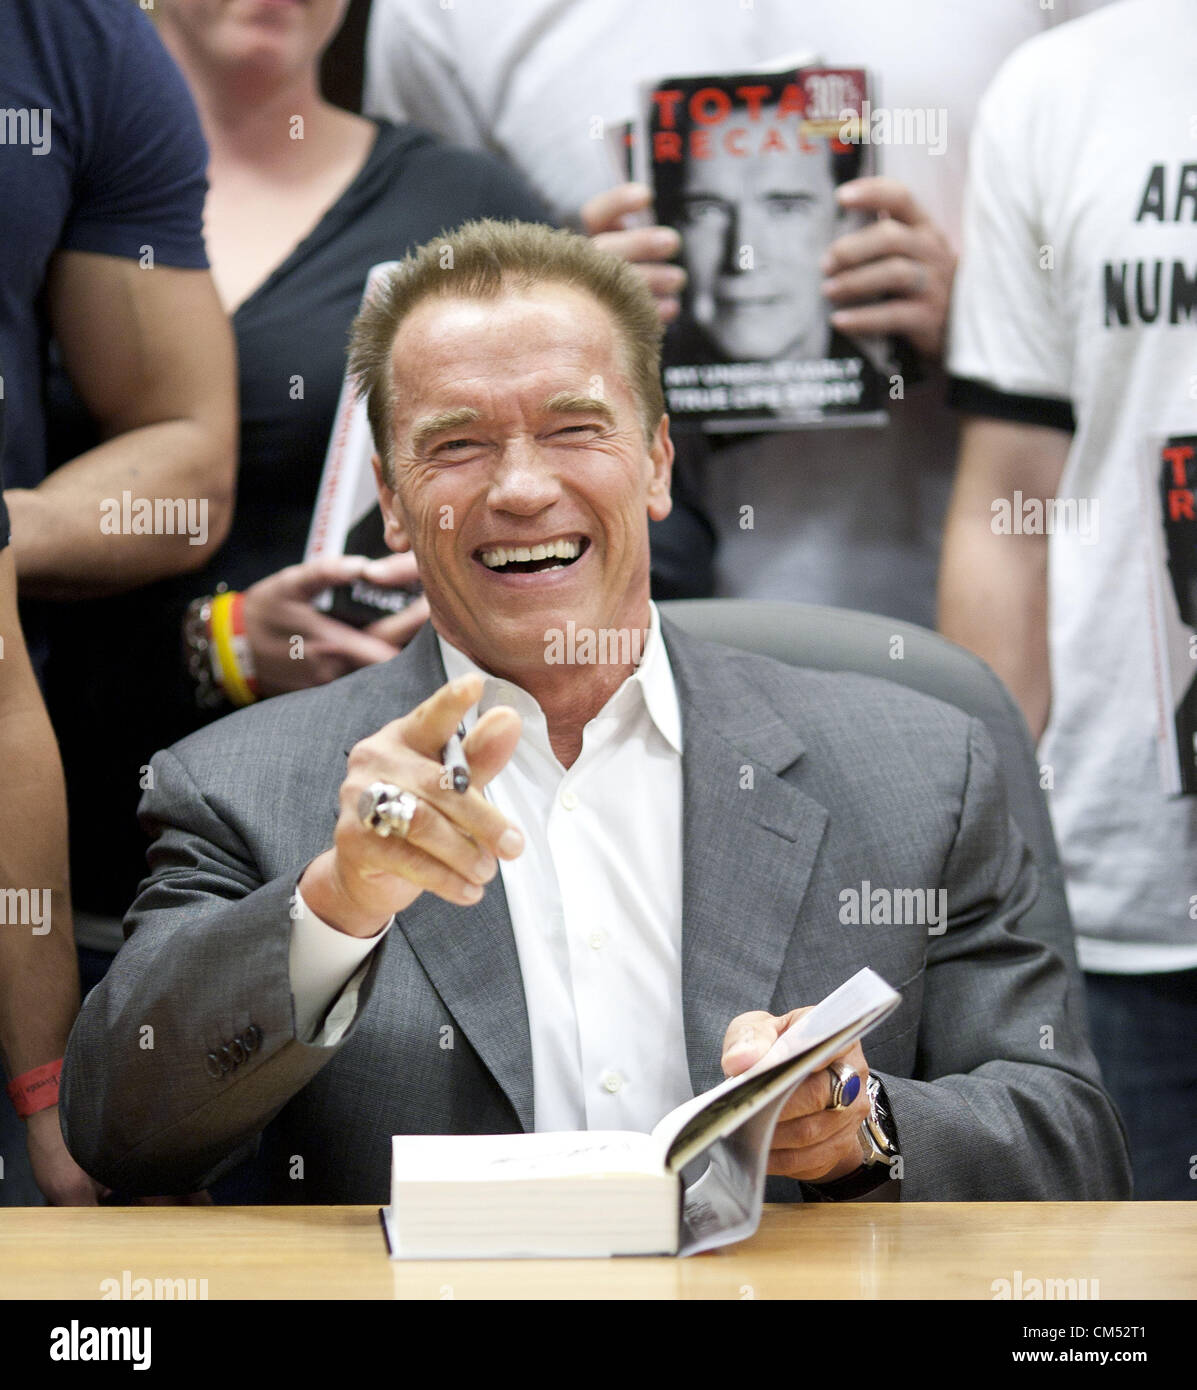 Oct. 5, 2012 - Los Angeles, California, U.S. - Actor and former California Governor ARNOLD SCHWARZENEGGER signs his memoir 'Total Recall - My Unbelievably True Life Story' in Los Angeles. Schwarzenegger's book 'Total Recall', named after one of his blockbuster movies, includes details of his marital infidelities including fathering a child with his housekeeper, leading his wife M. Shriver to file for divorce. (Credit Image: © Armando Arorizo/Prensa Internacional/ZUMAPRESS.com) Stock Photo